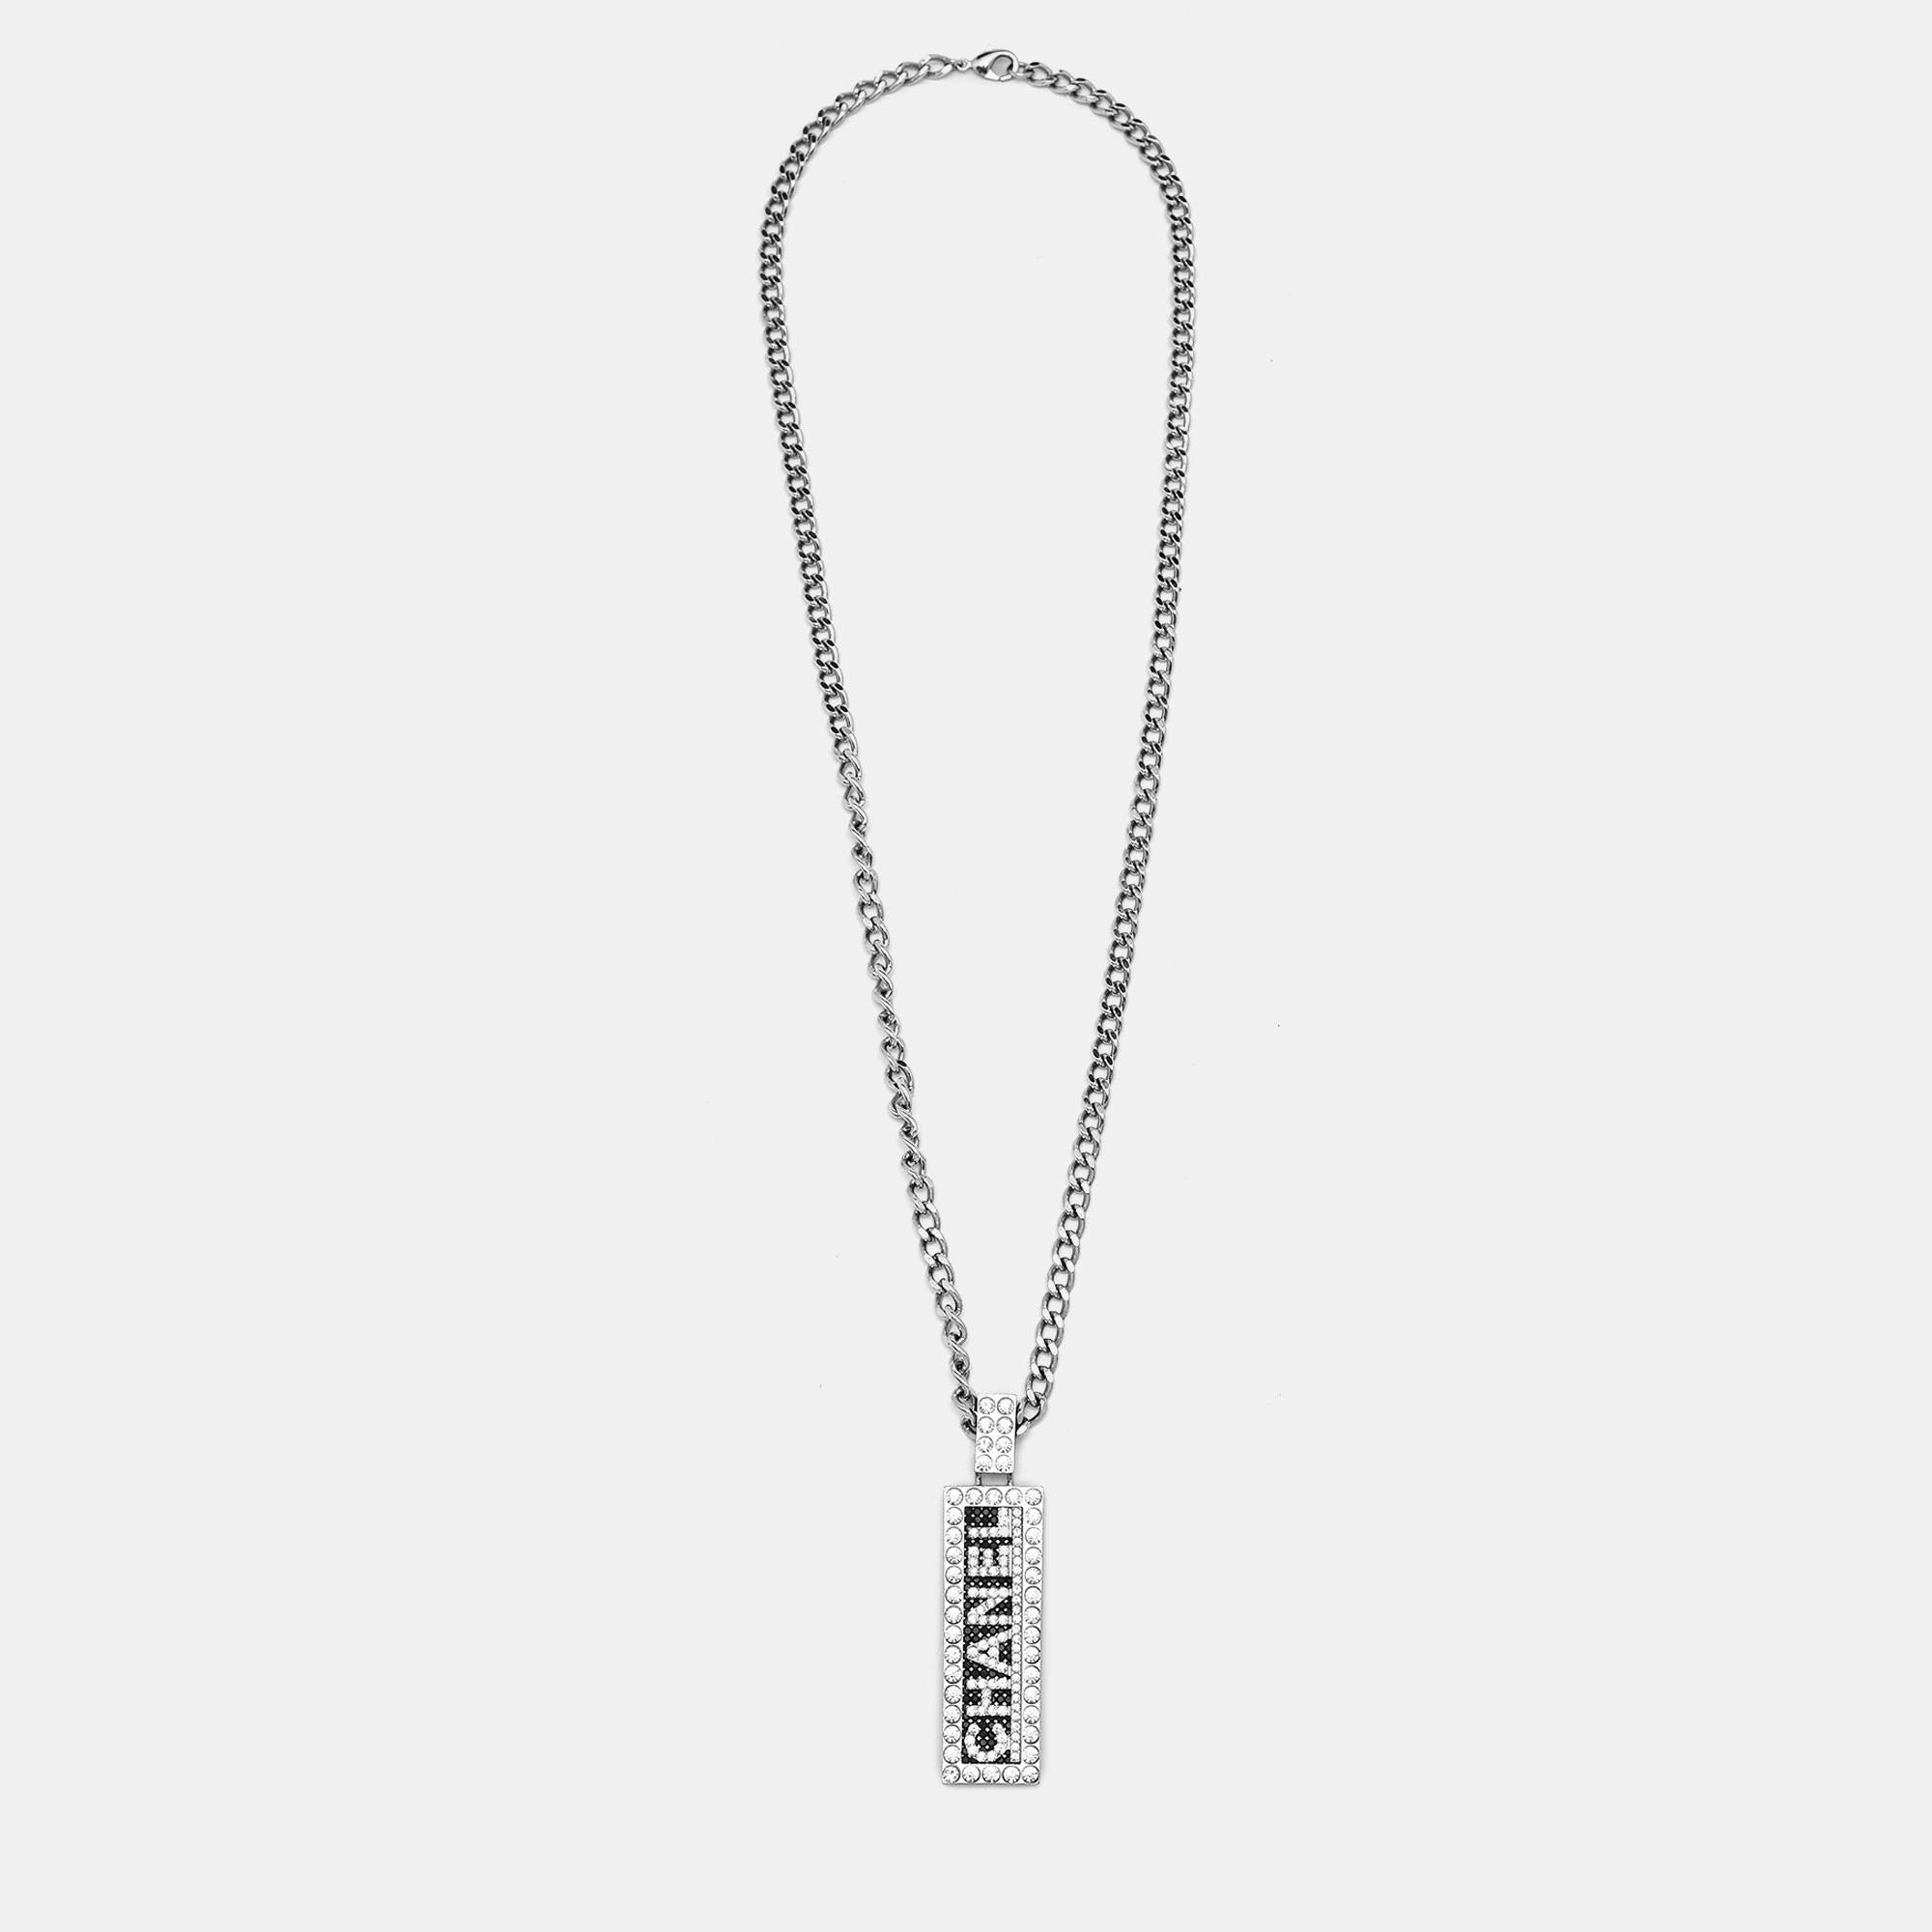 Define your neck with this super-stylish necklace by Chanel. It is a masterfully crafted creation that promises to hold its beauty and value for a long time.

